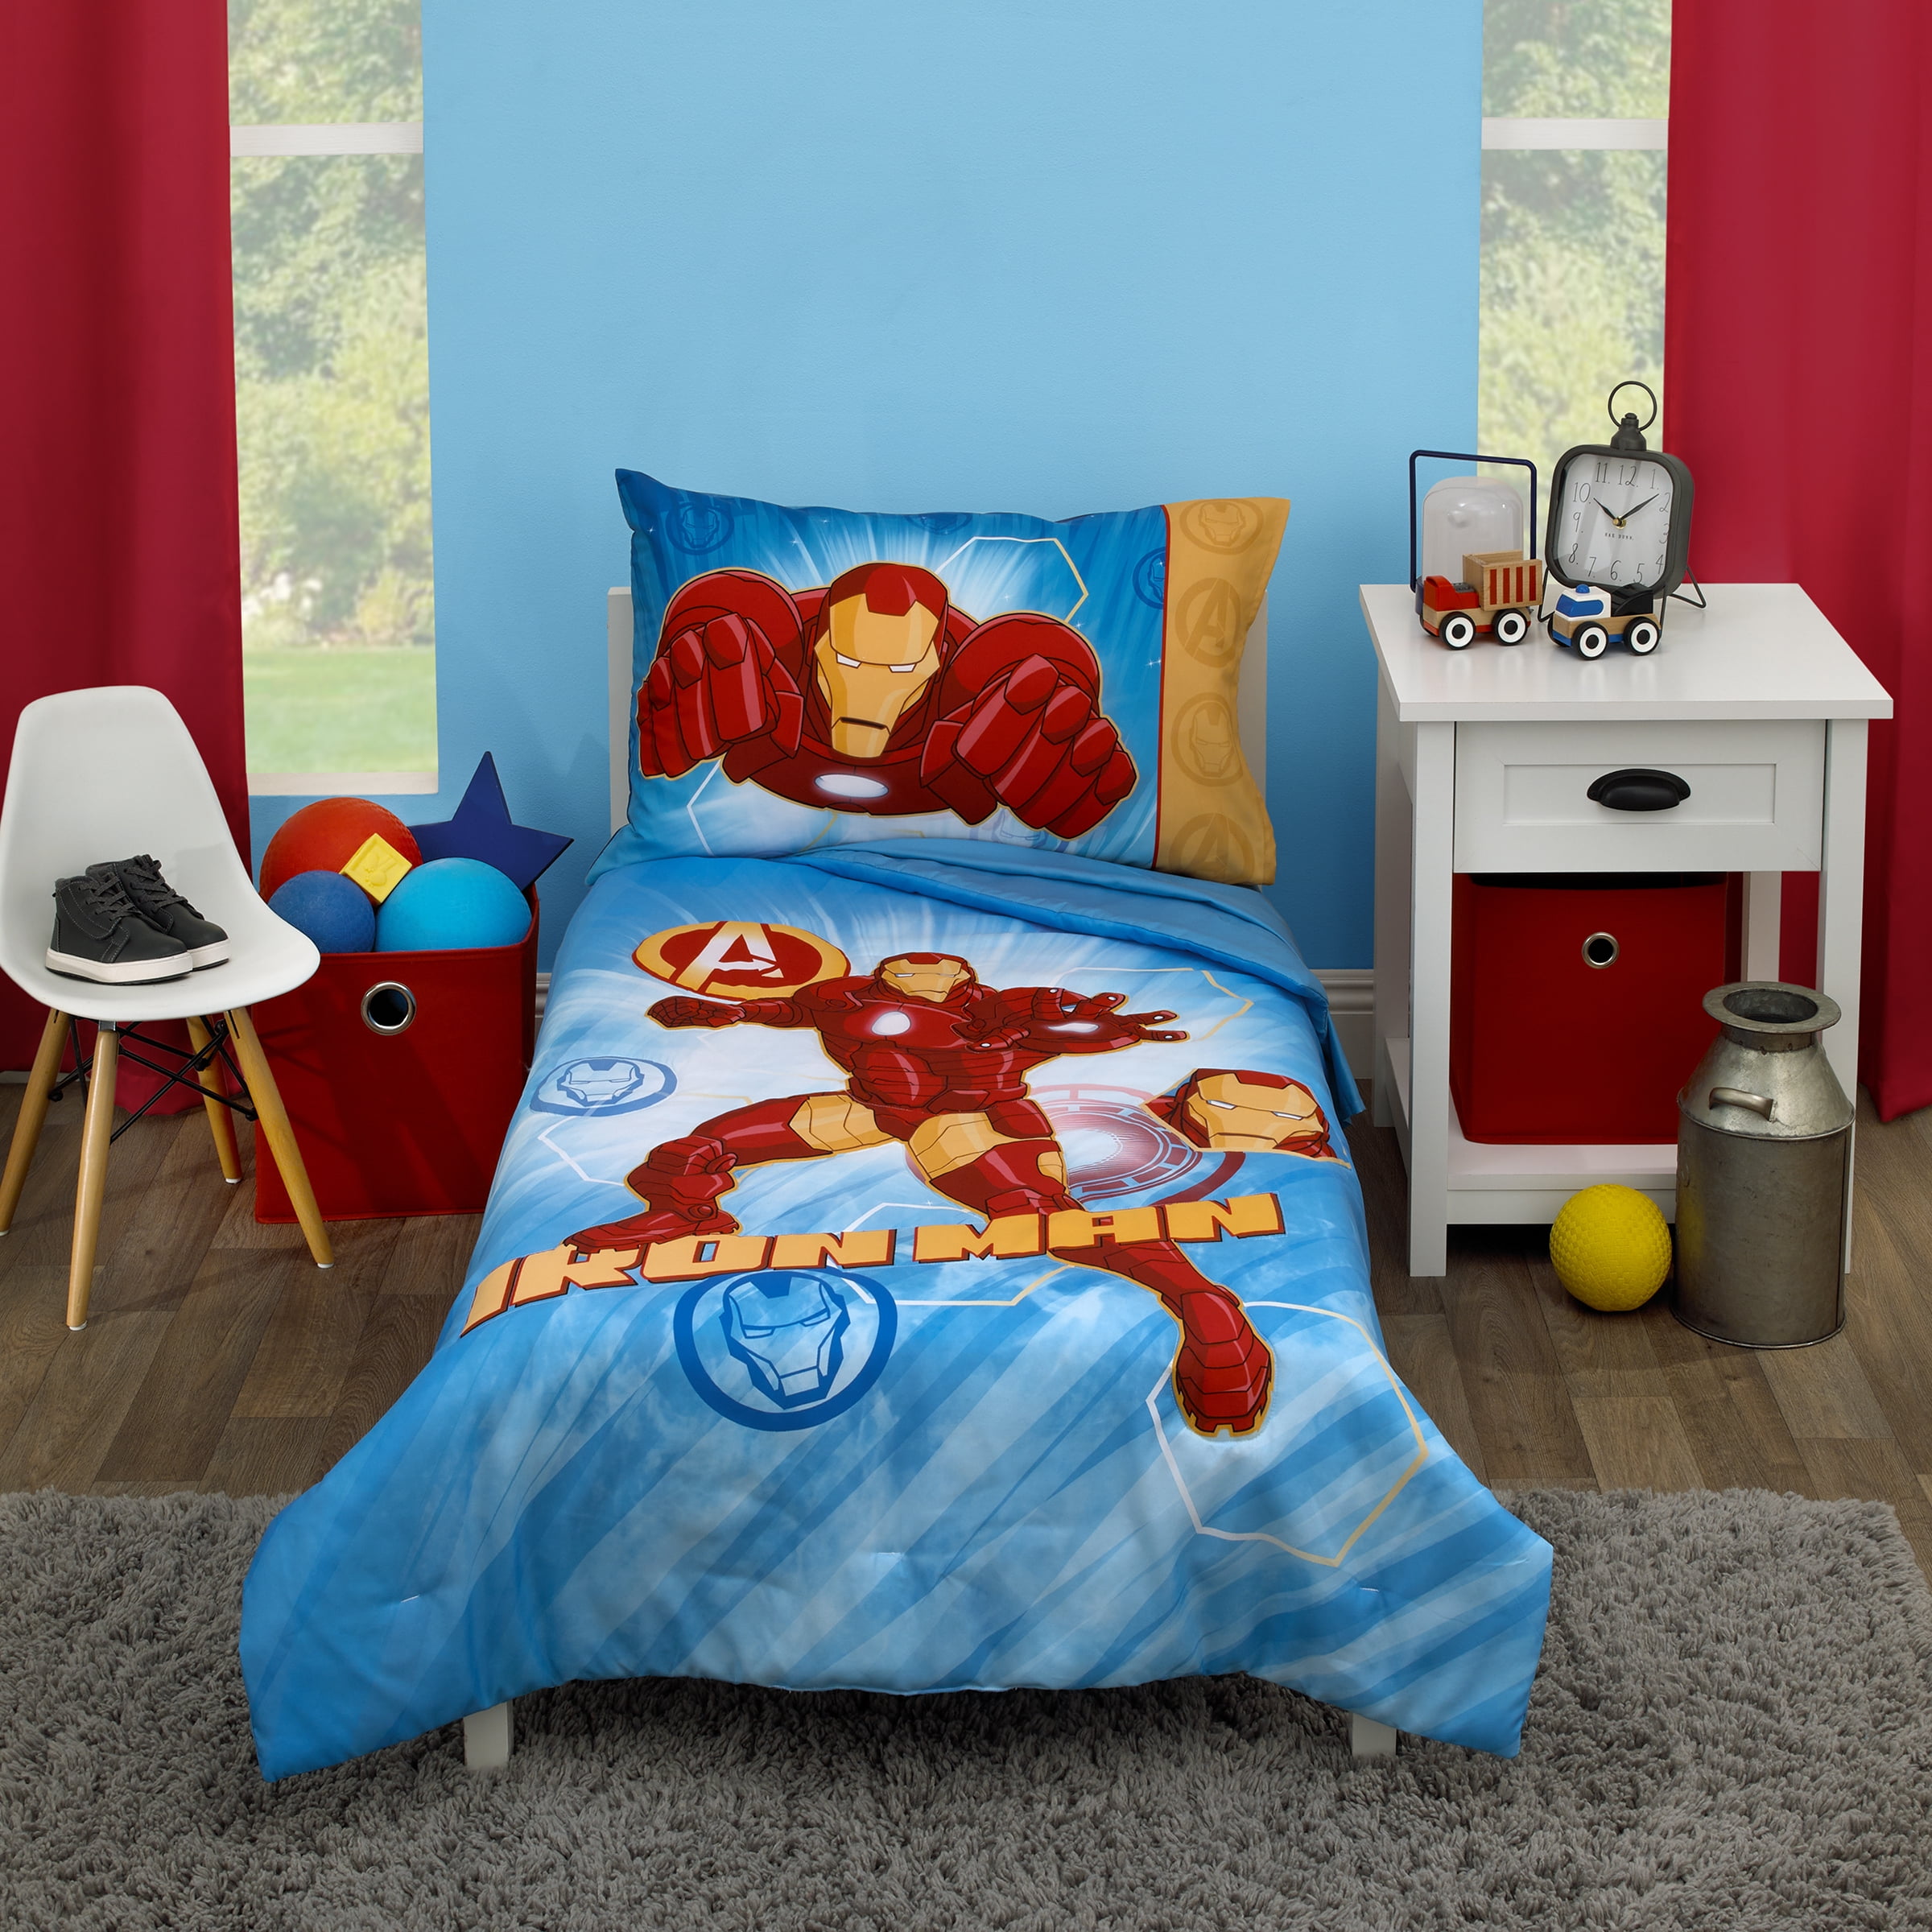 BOYS 4PC TODDLER BEDDING SET NEW MULTIPLE DISNEY CHARACTERS TV CHARACTERS 